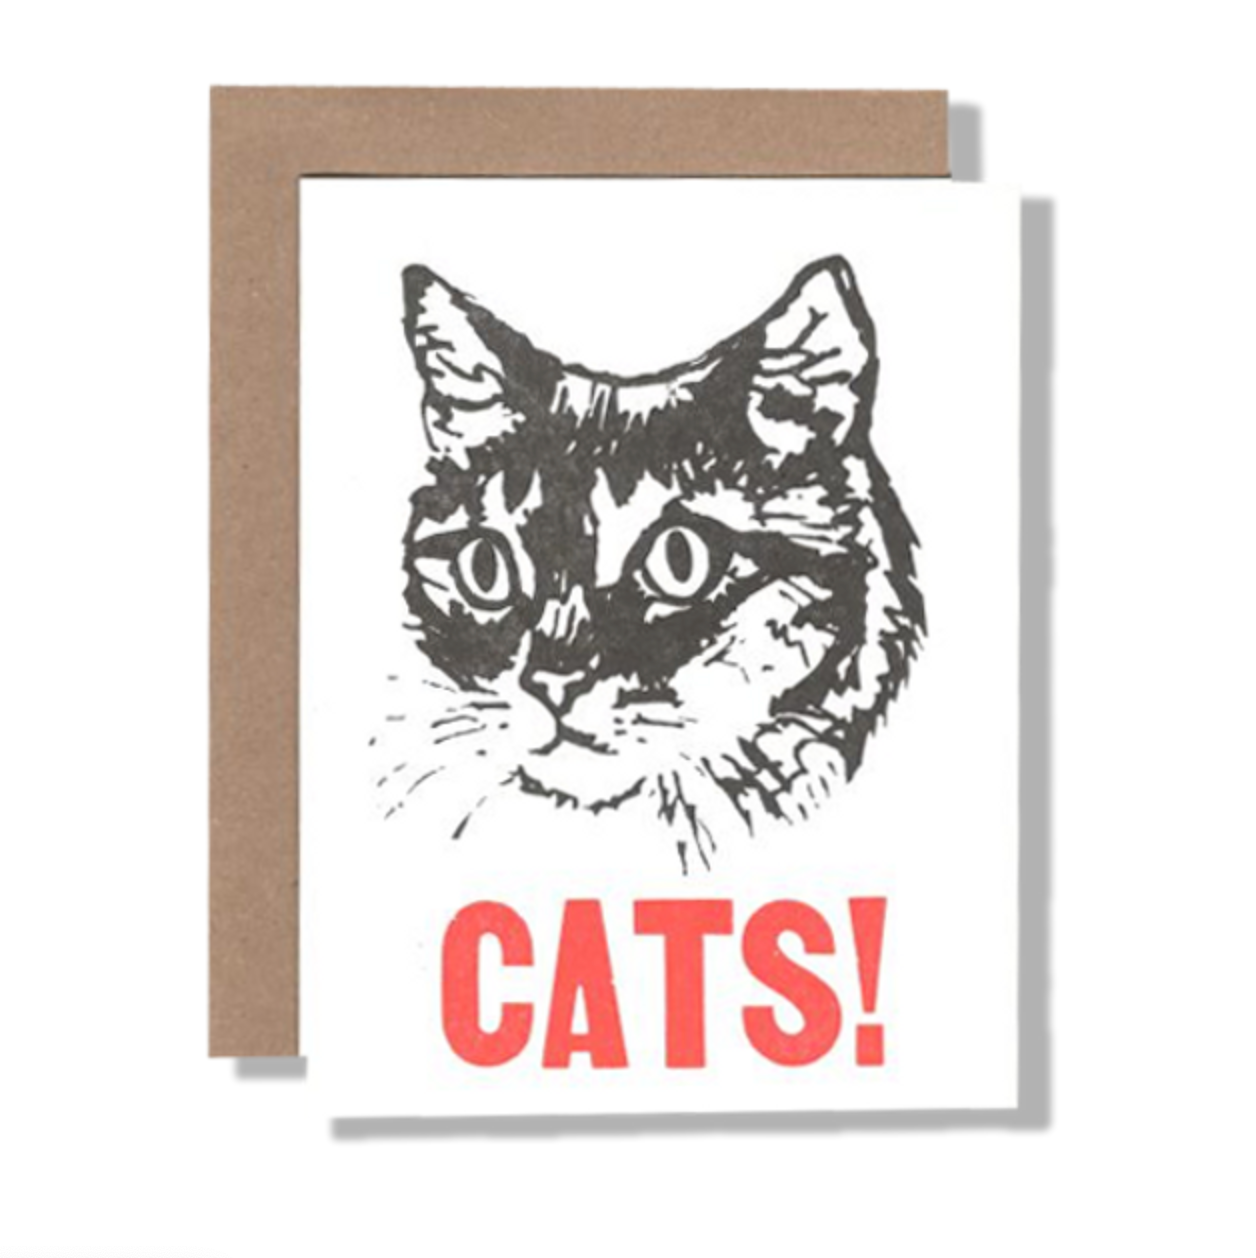 "Cats!" - Greeting Card